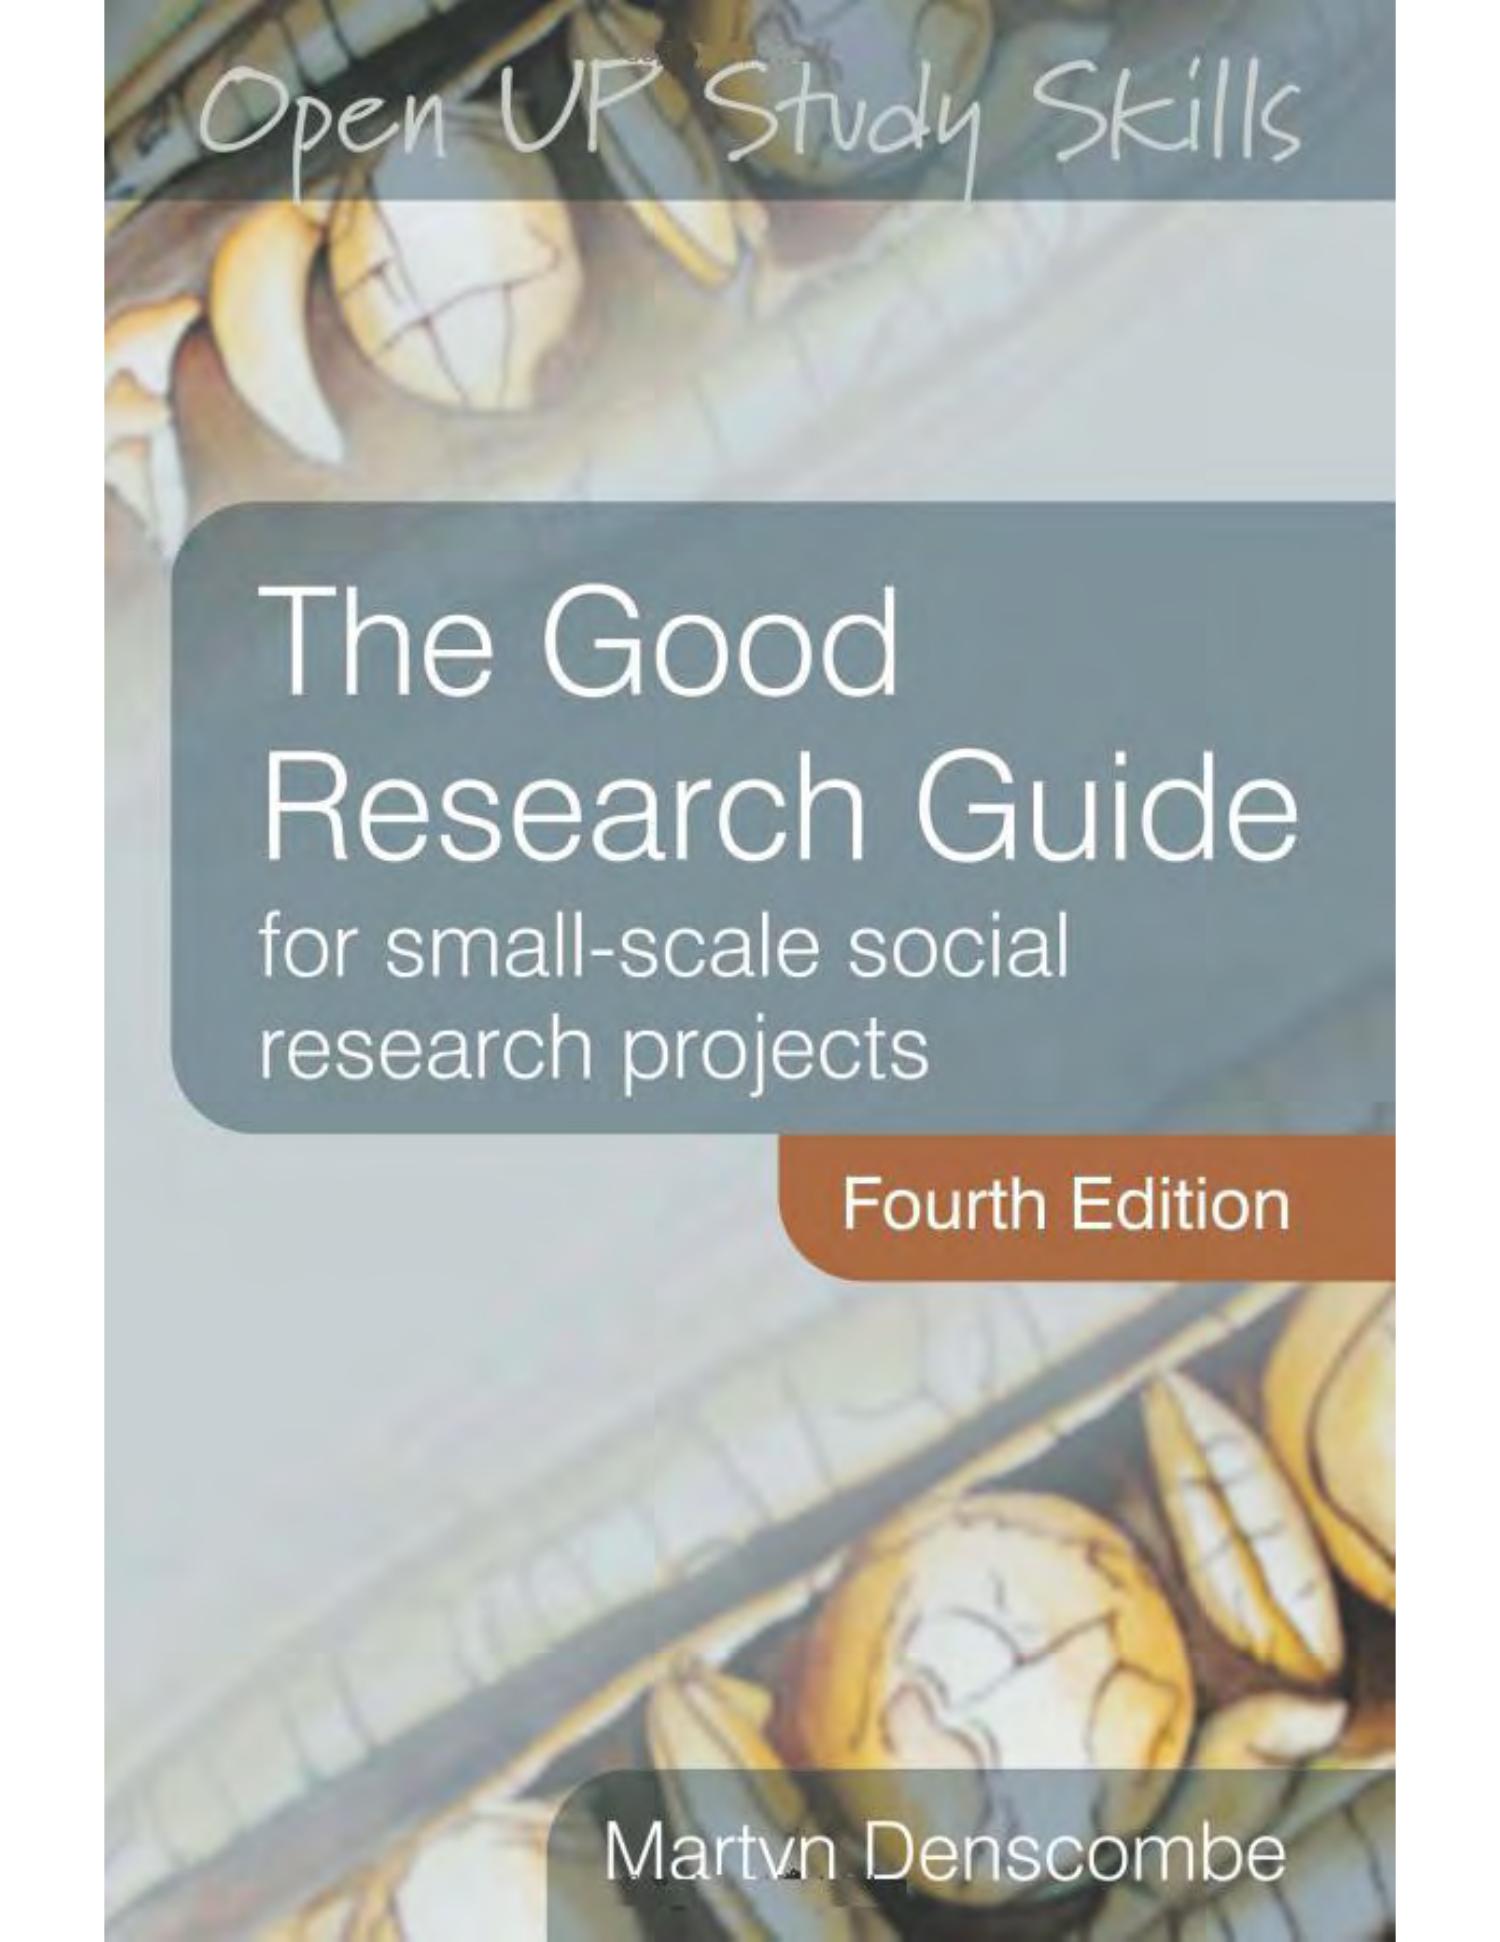 the good research guide 5th edition pdf